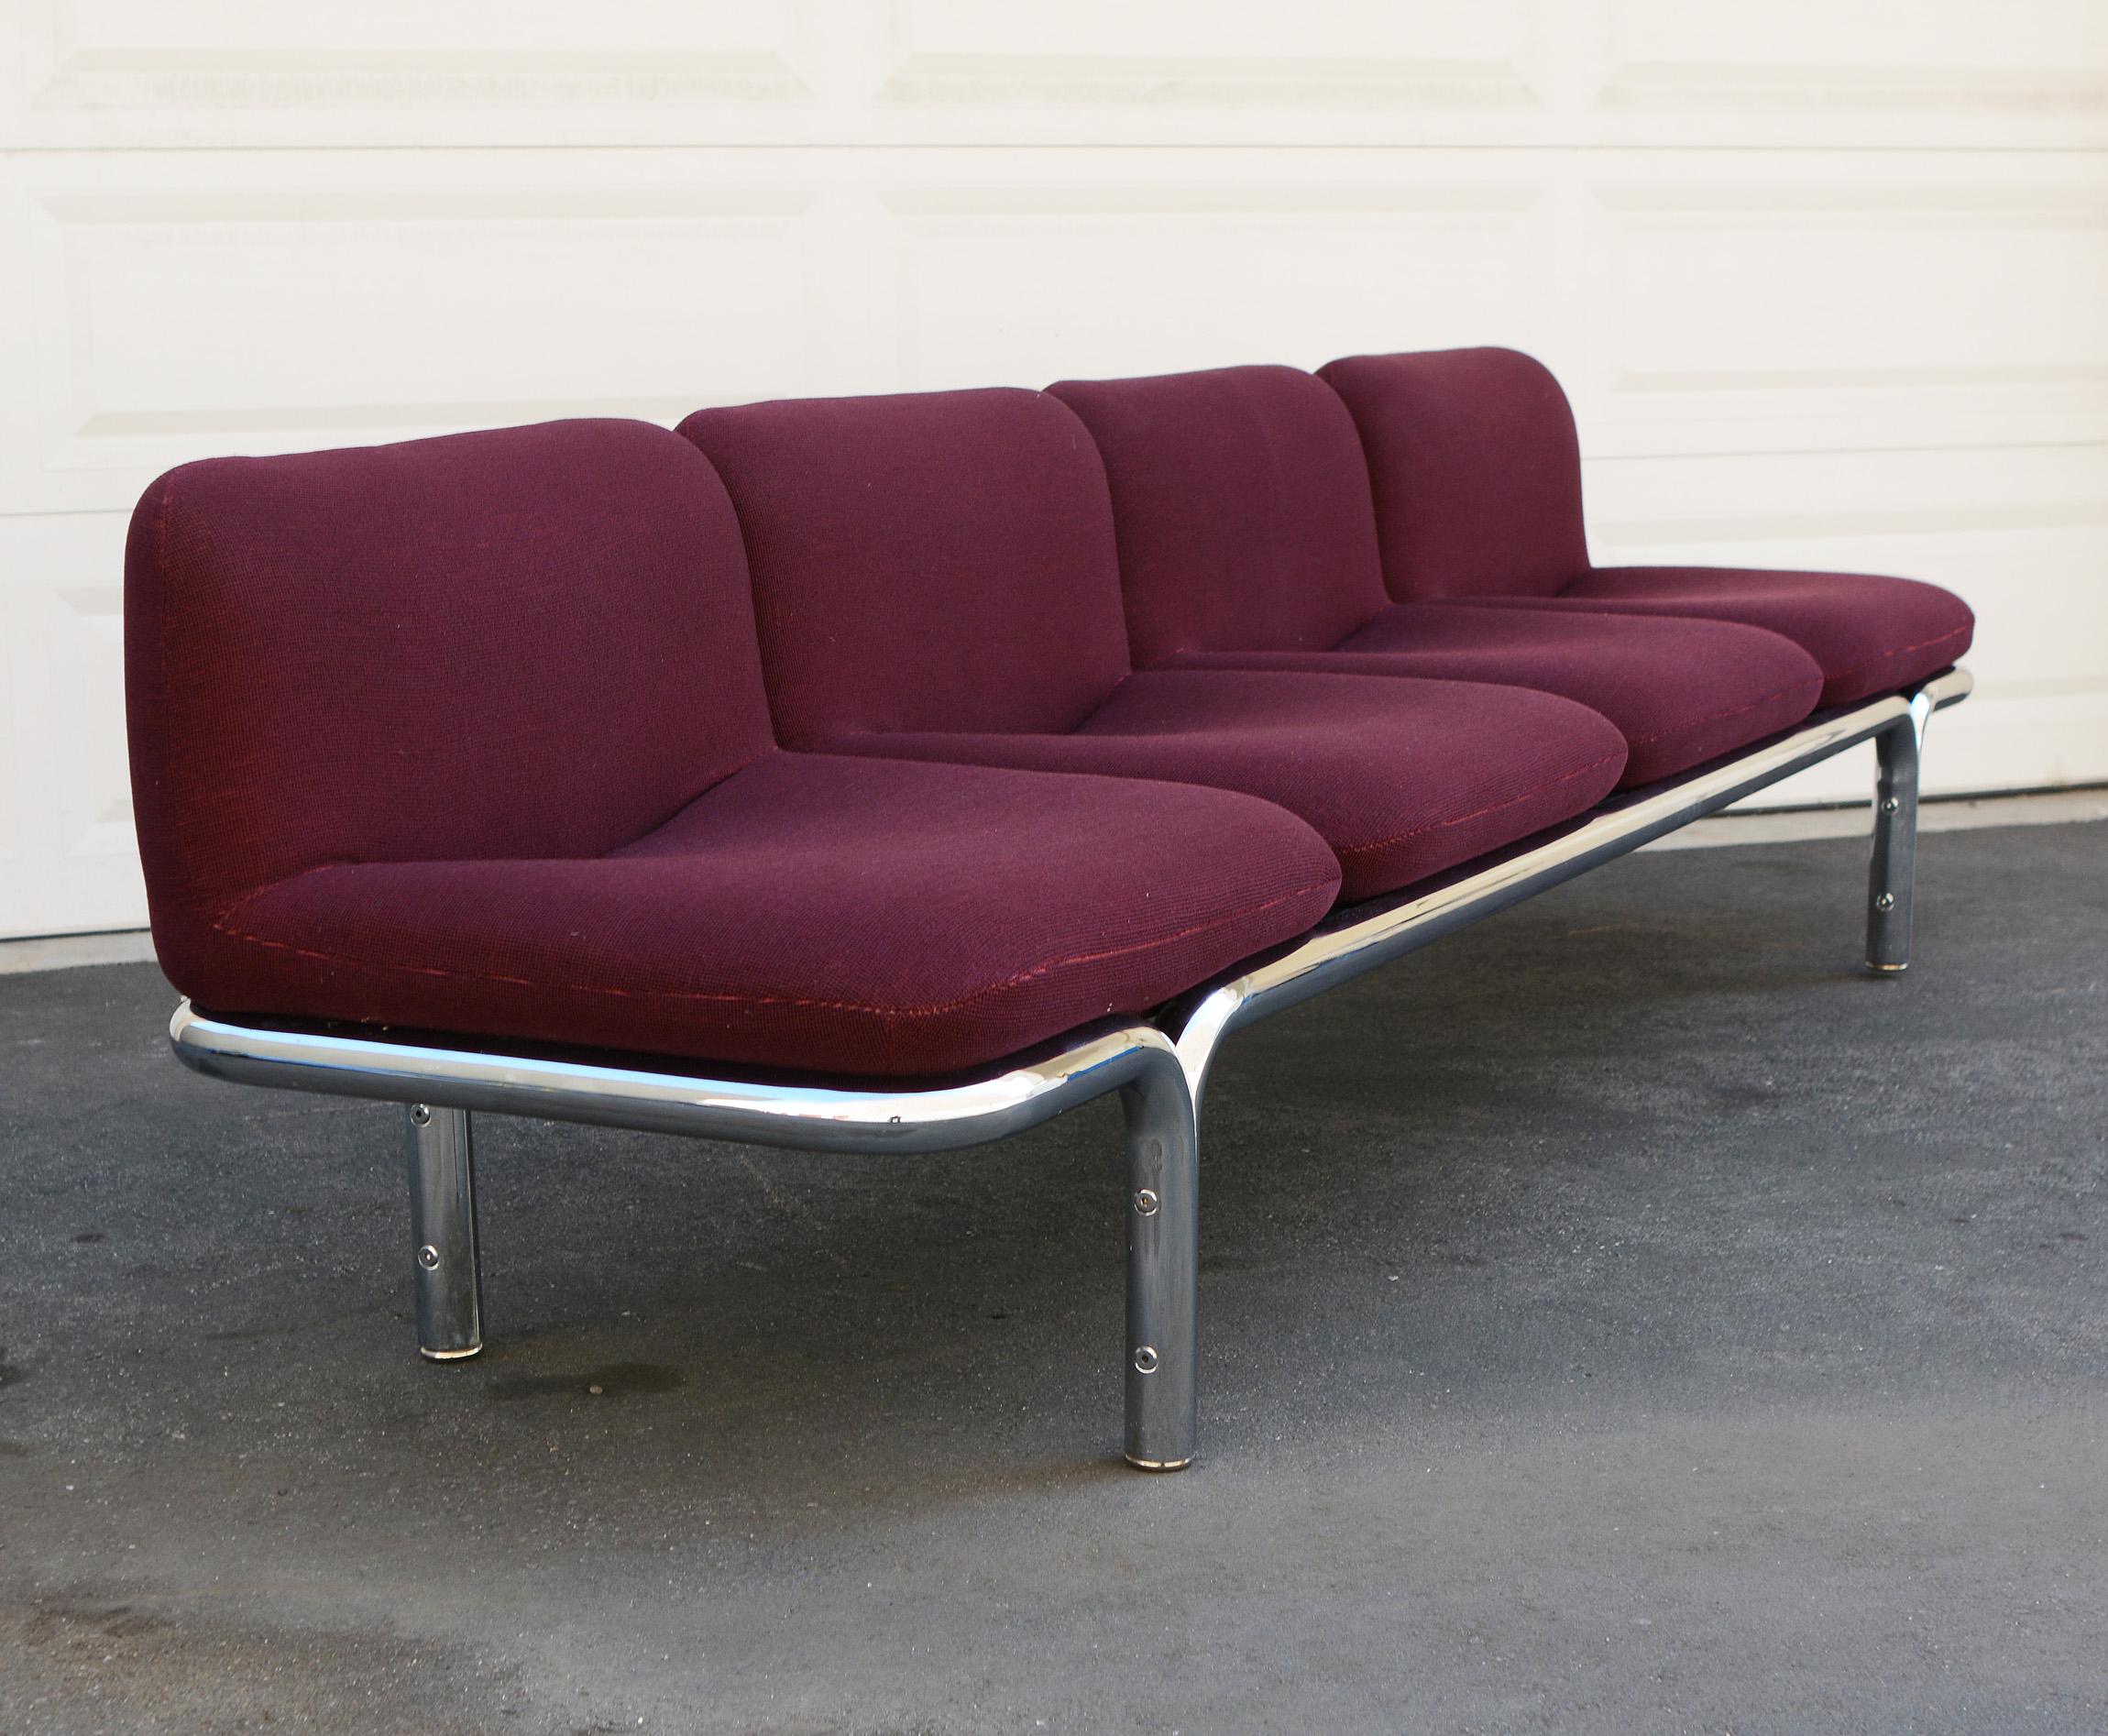 Series 10 sofa designed by Brian Kane. The sofa has a tubular chrome frame with four separate upholstered seats. This sofa is nine feet long. The chrome shows normal wear with some light scratches on the ends. The upholstery is older but in good